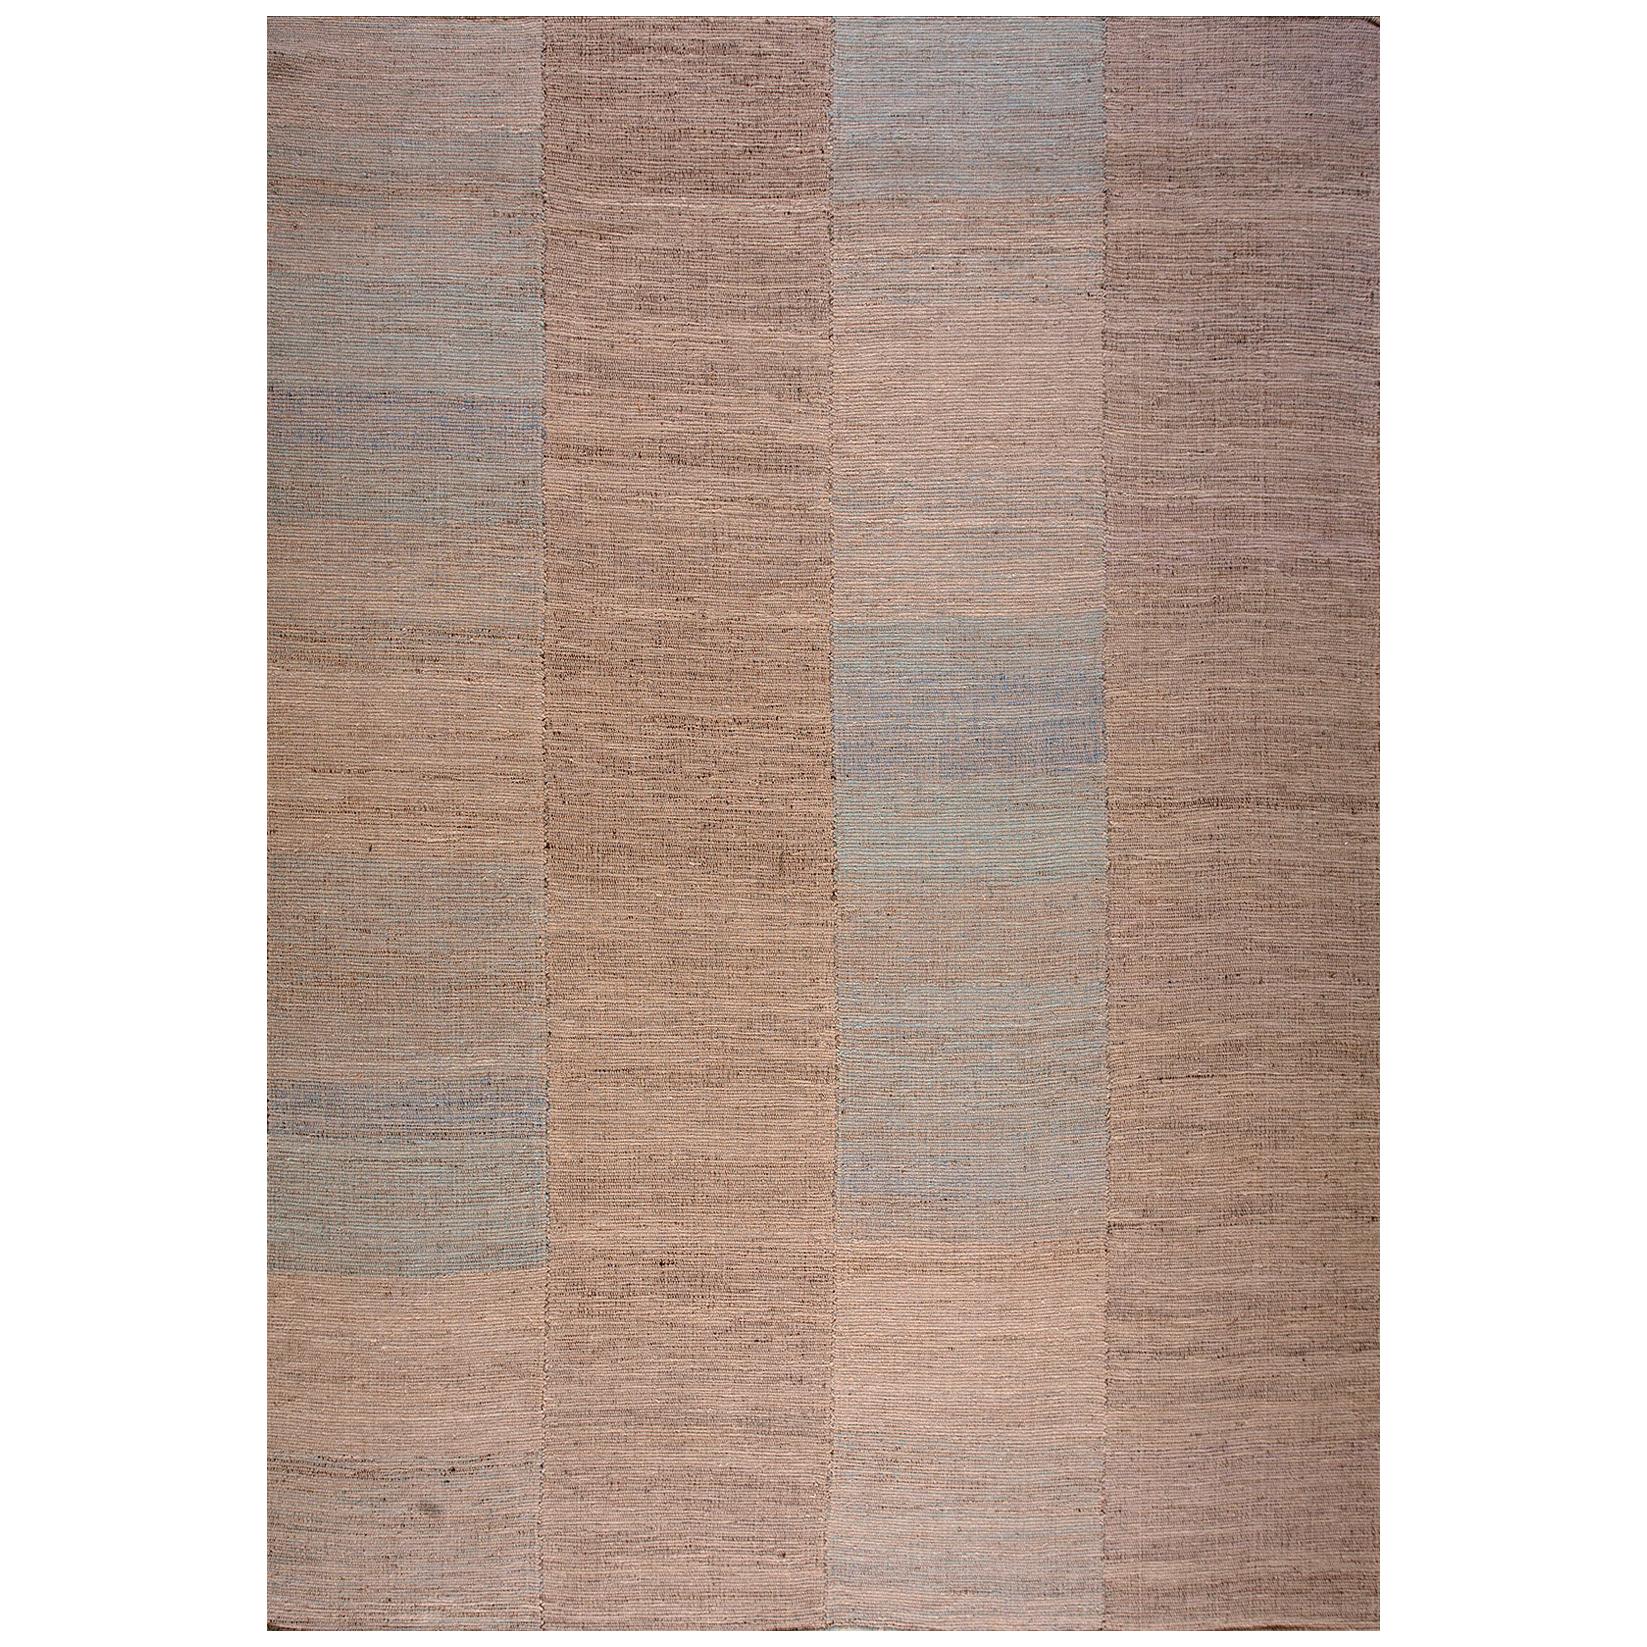 Contemporary Handwoven Wool Shaker Style Flat Weave Carpet 10' 3" x 13' 8" For Sale